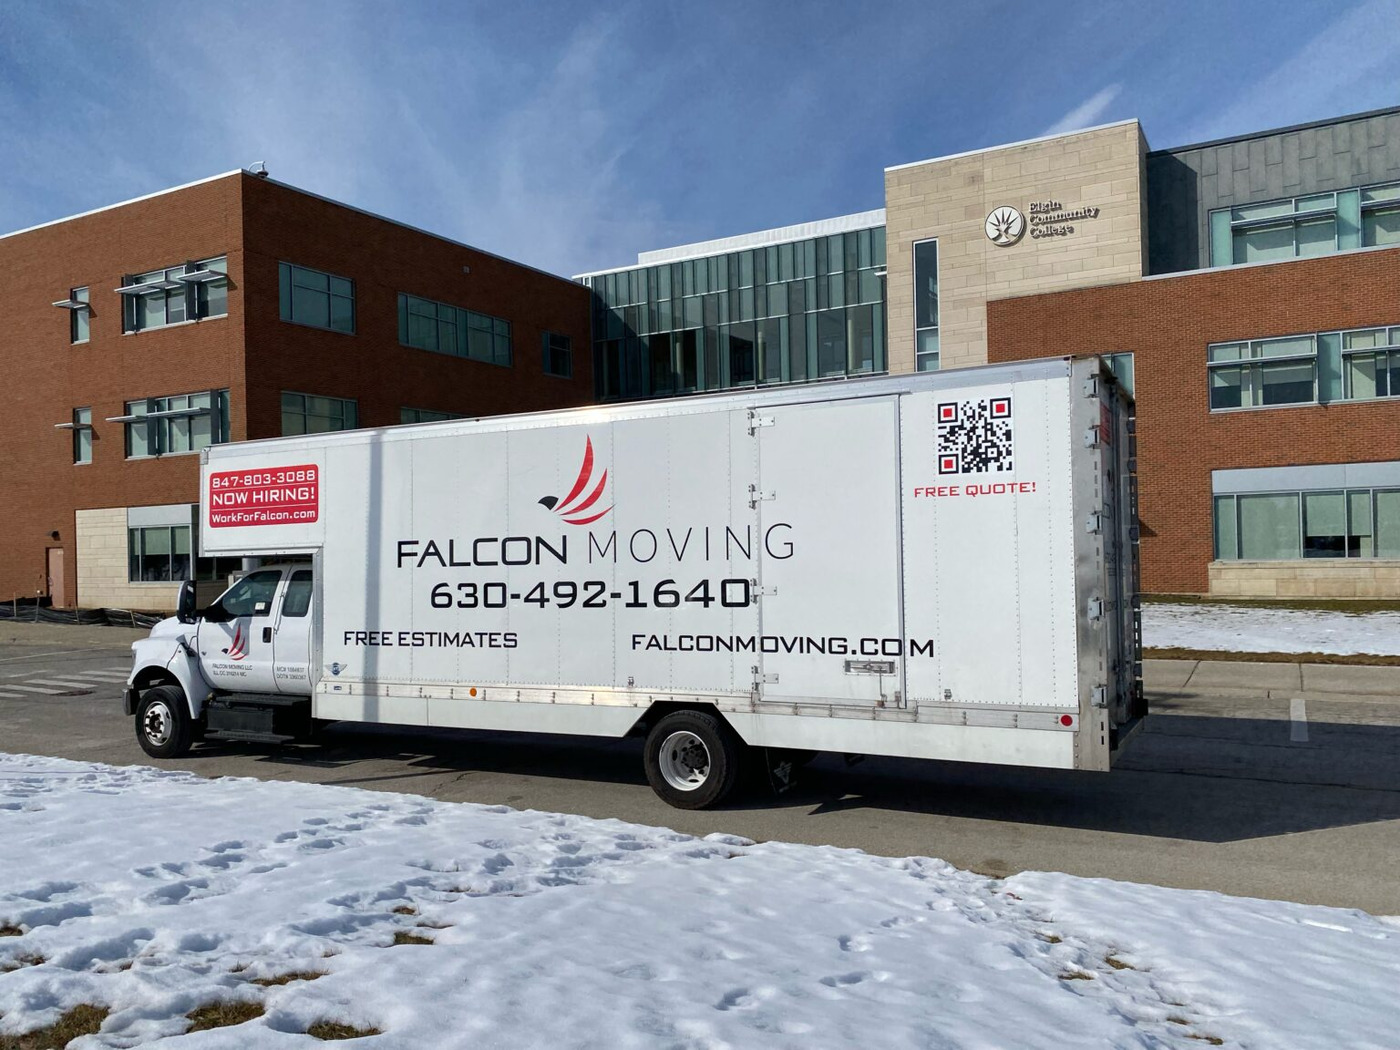 Falcon Moving, LLC (Glen Ellyn) is a trusted moving company in Glen Ellyn dedicated to providing top-notch moving services for both residential and commercial clients.